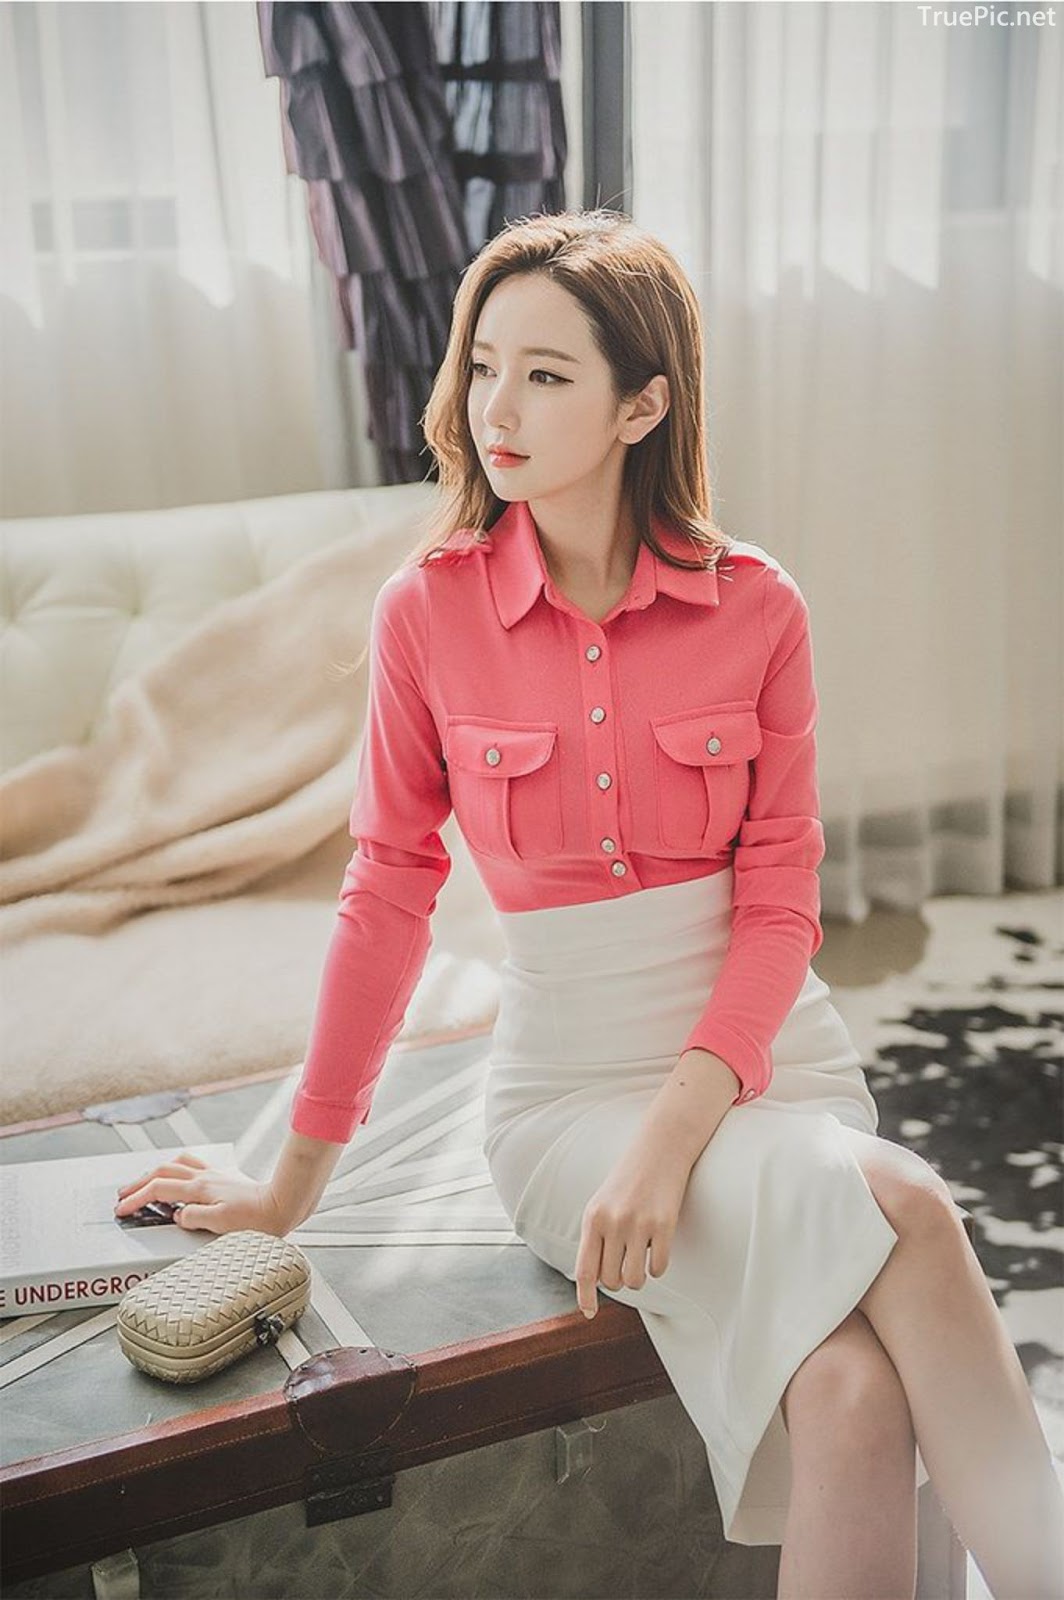 Lee Yeon Jeong - Indoor Photoshoot Collection - Korean fashion model - Part 5 - Picture 12